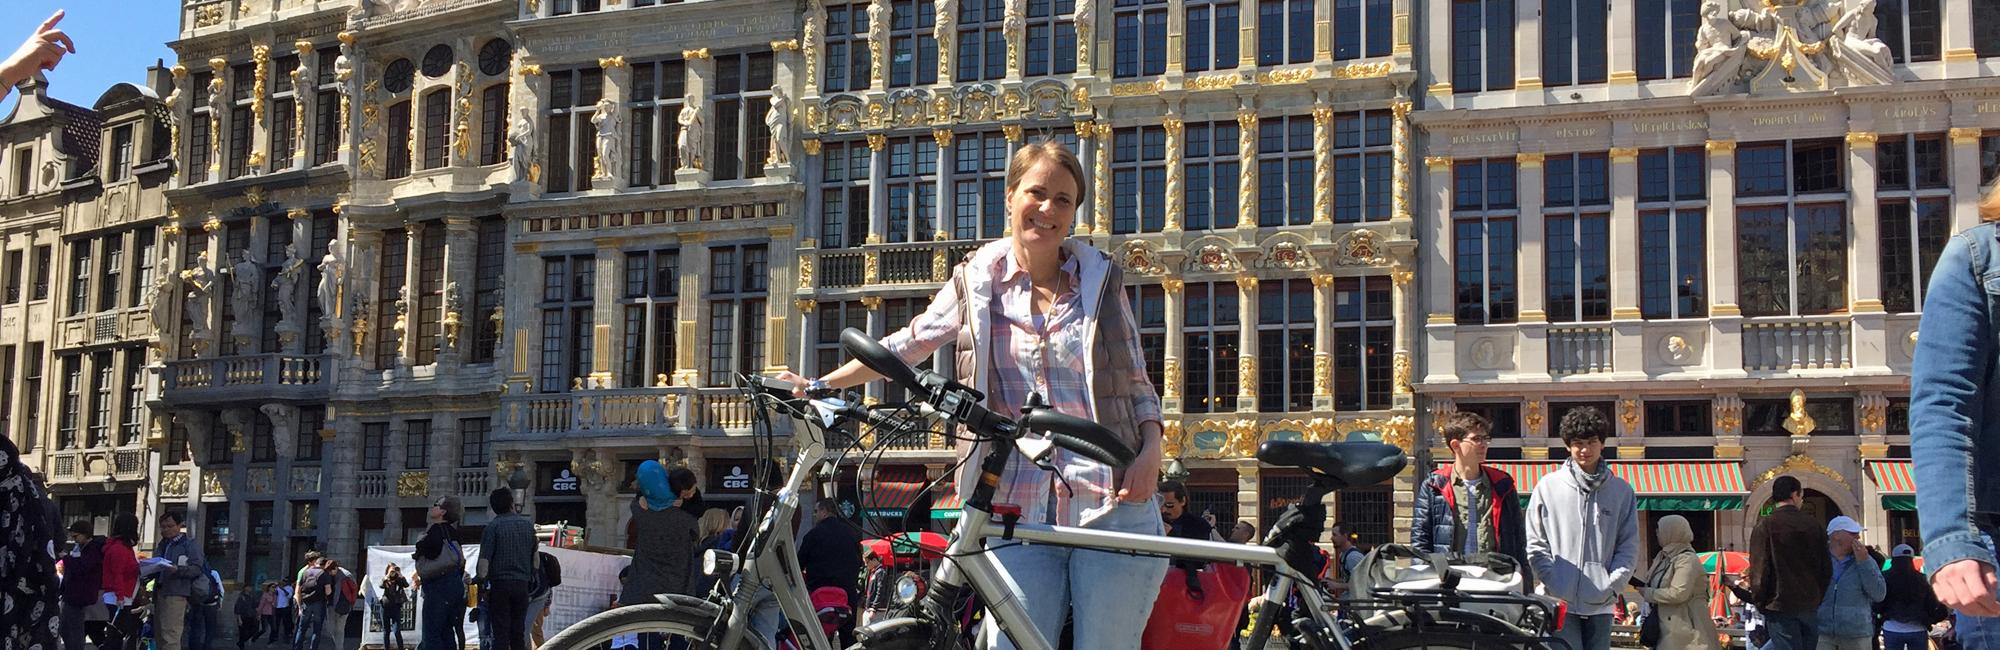 Dutch Bike Tours Cycling holiday Amsterdam - Brussels